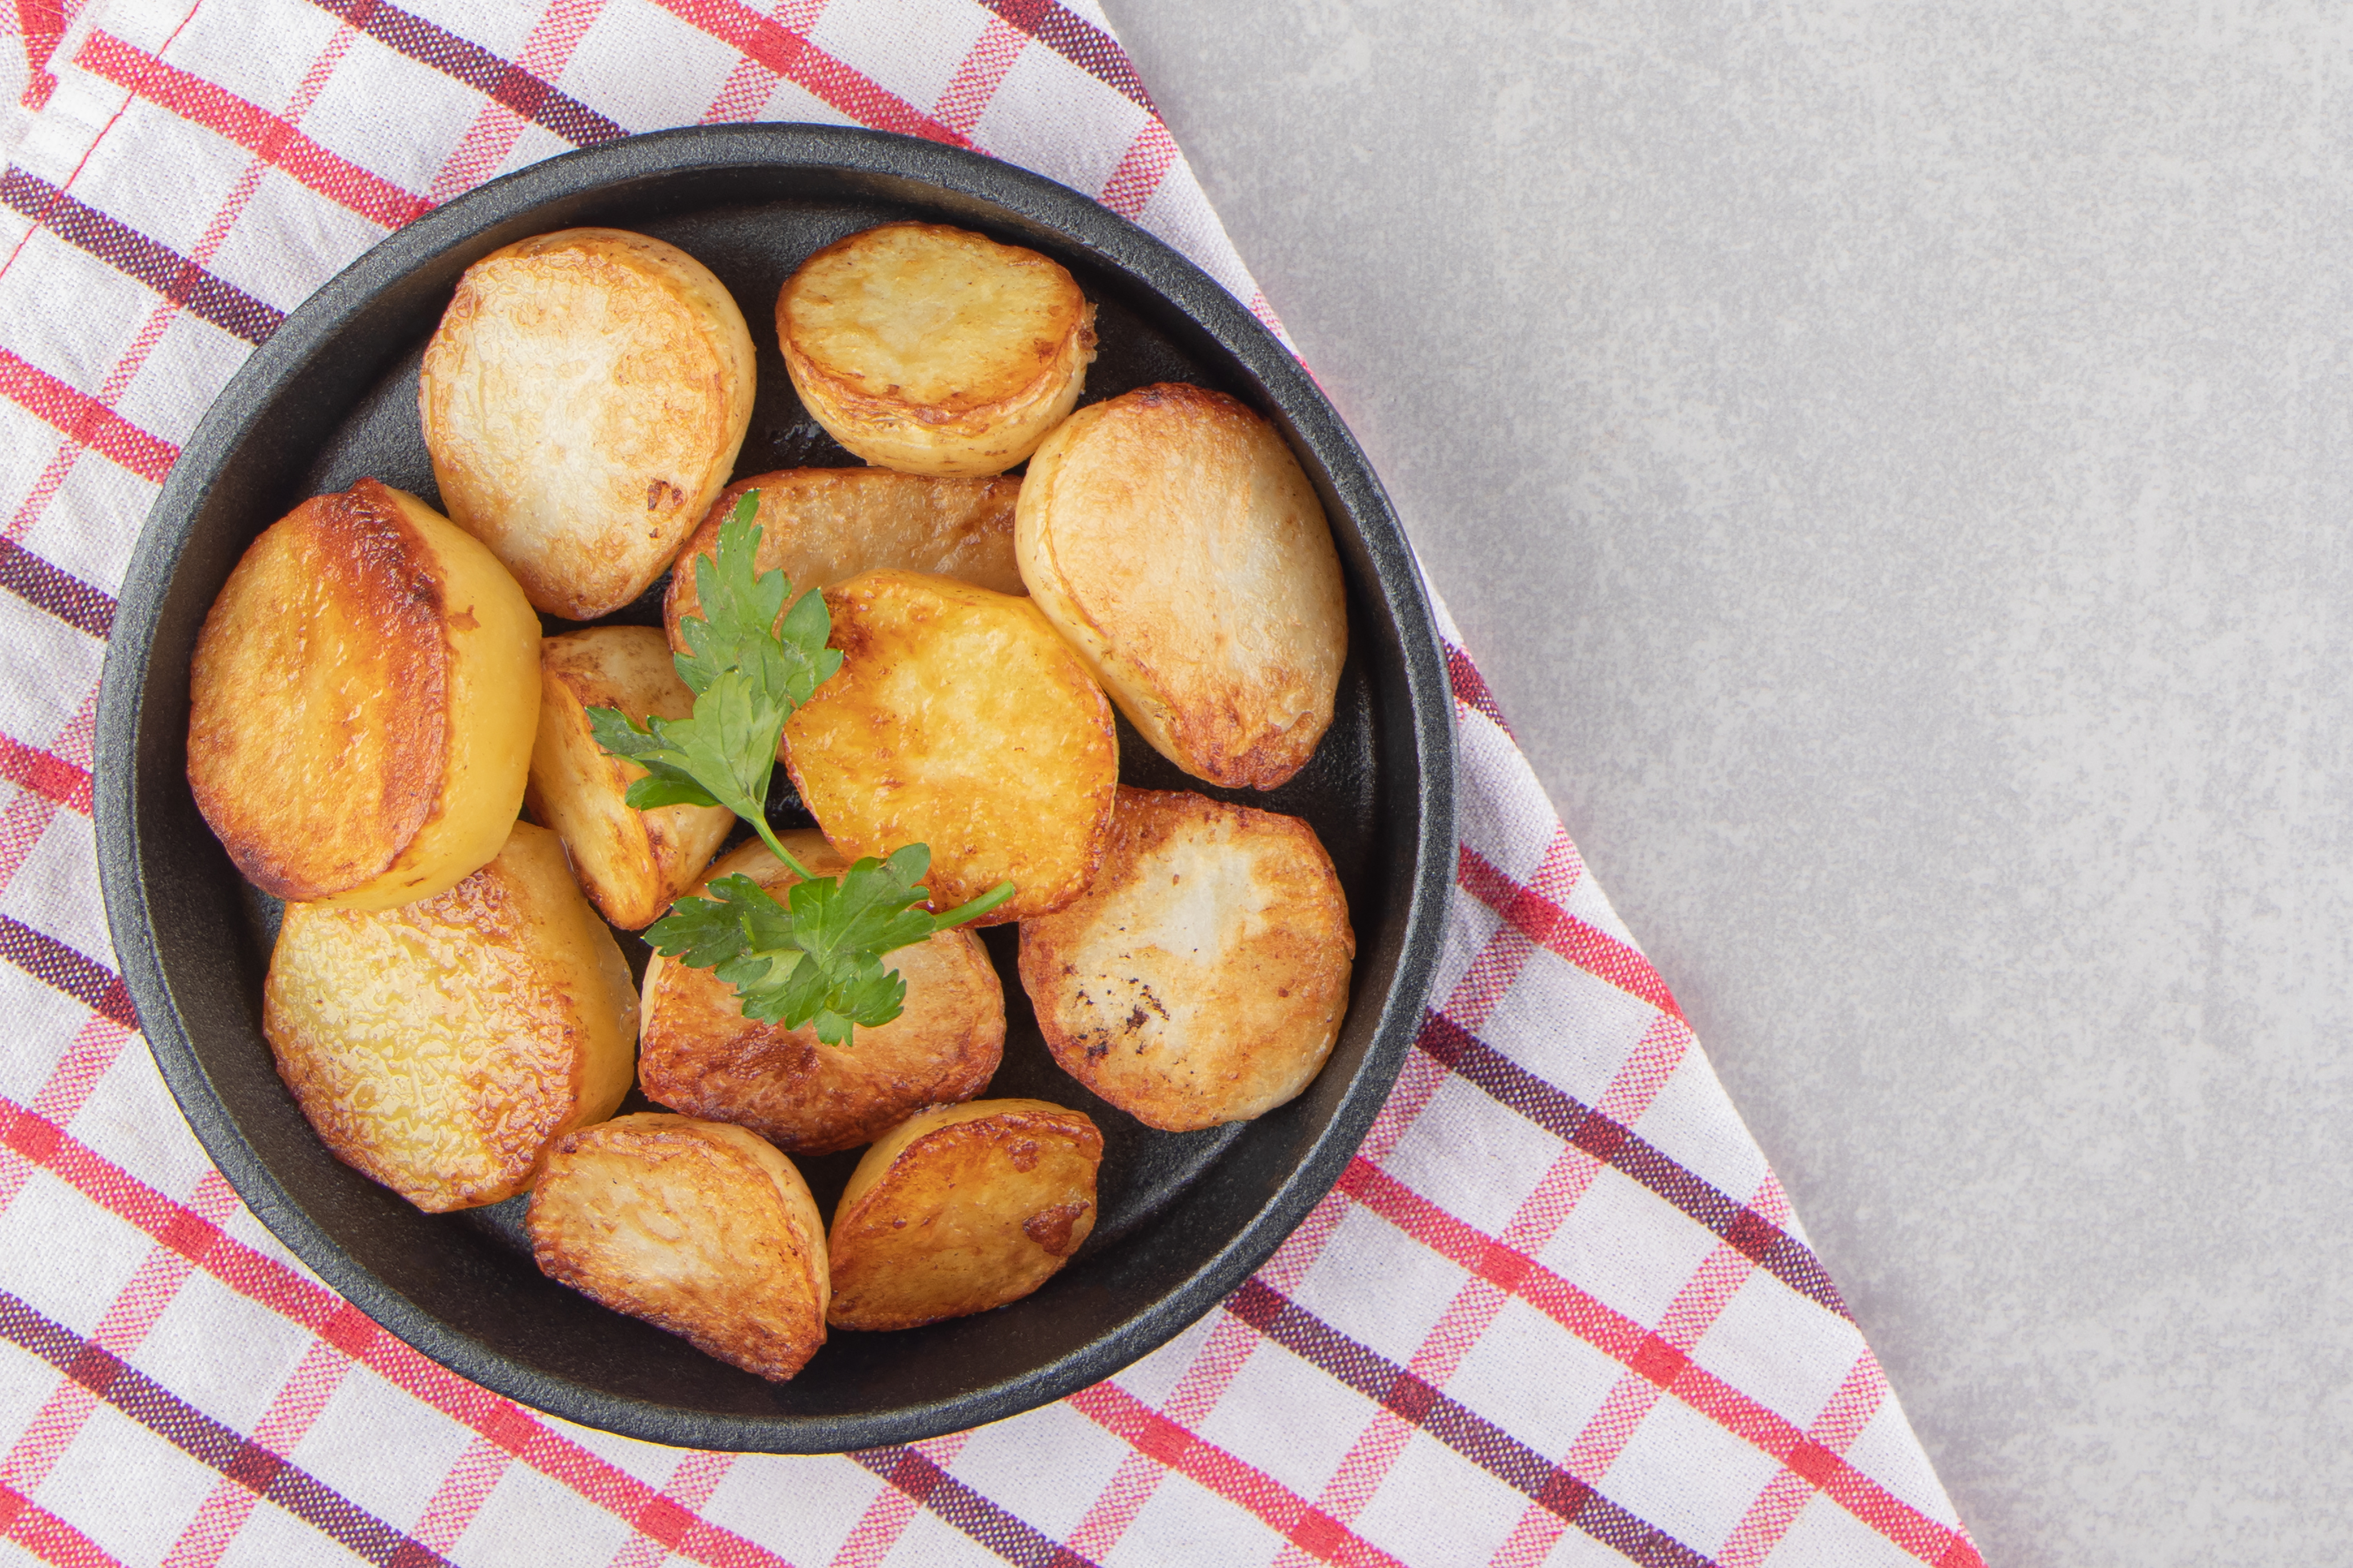 A spicy Navratri food made from fried baby potatoes